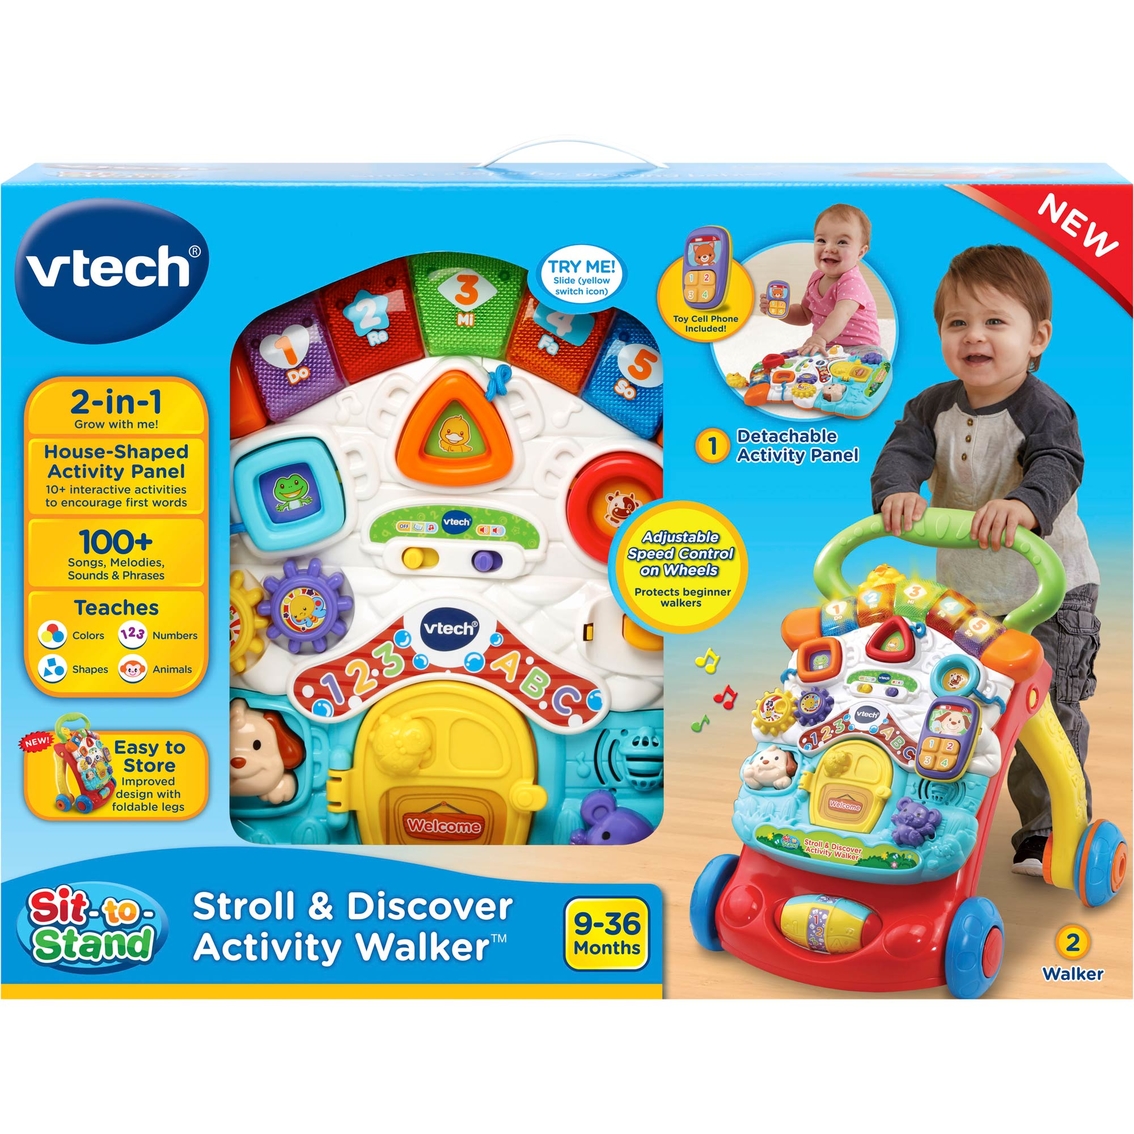 VTech Stroll & Discover Activity Walker Deluxe - Image 4 of 4